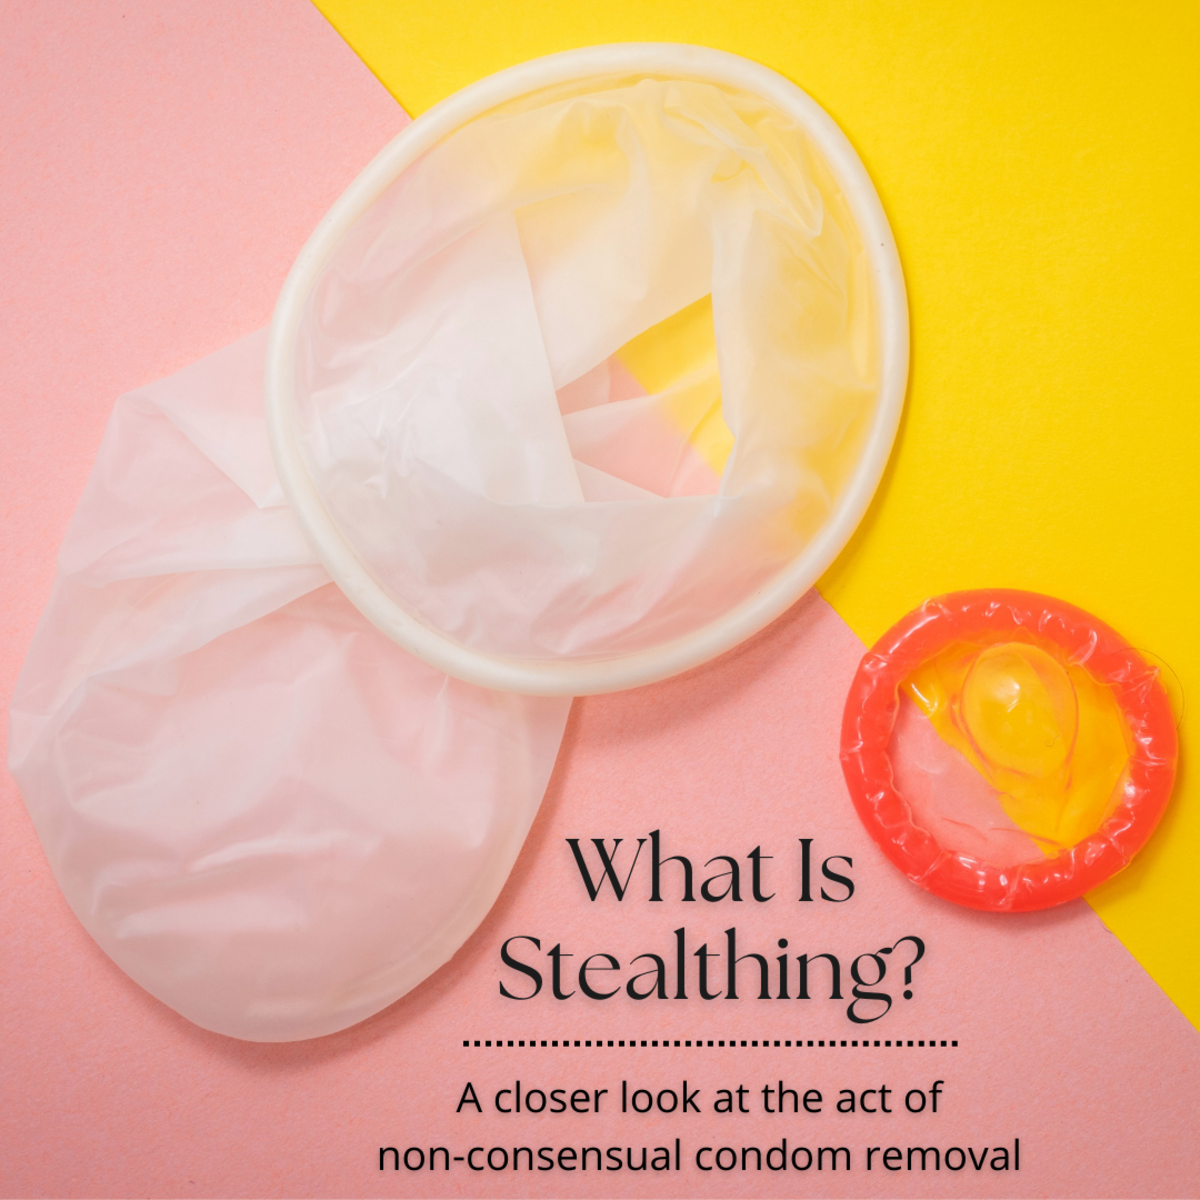 Stealthing (When a Man Secretly Removes the Condom) in Hetero or Homosexual Relationships